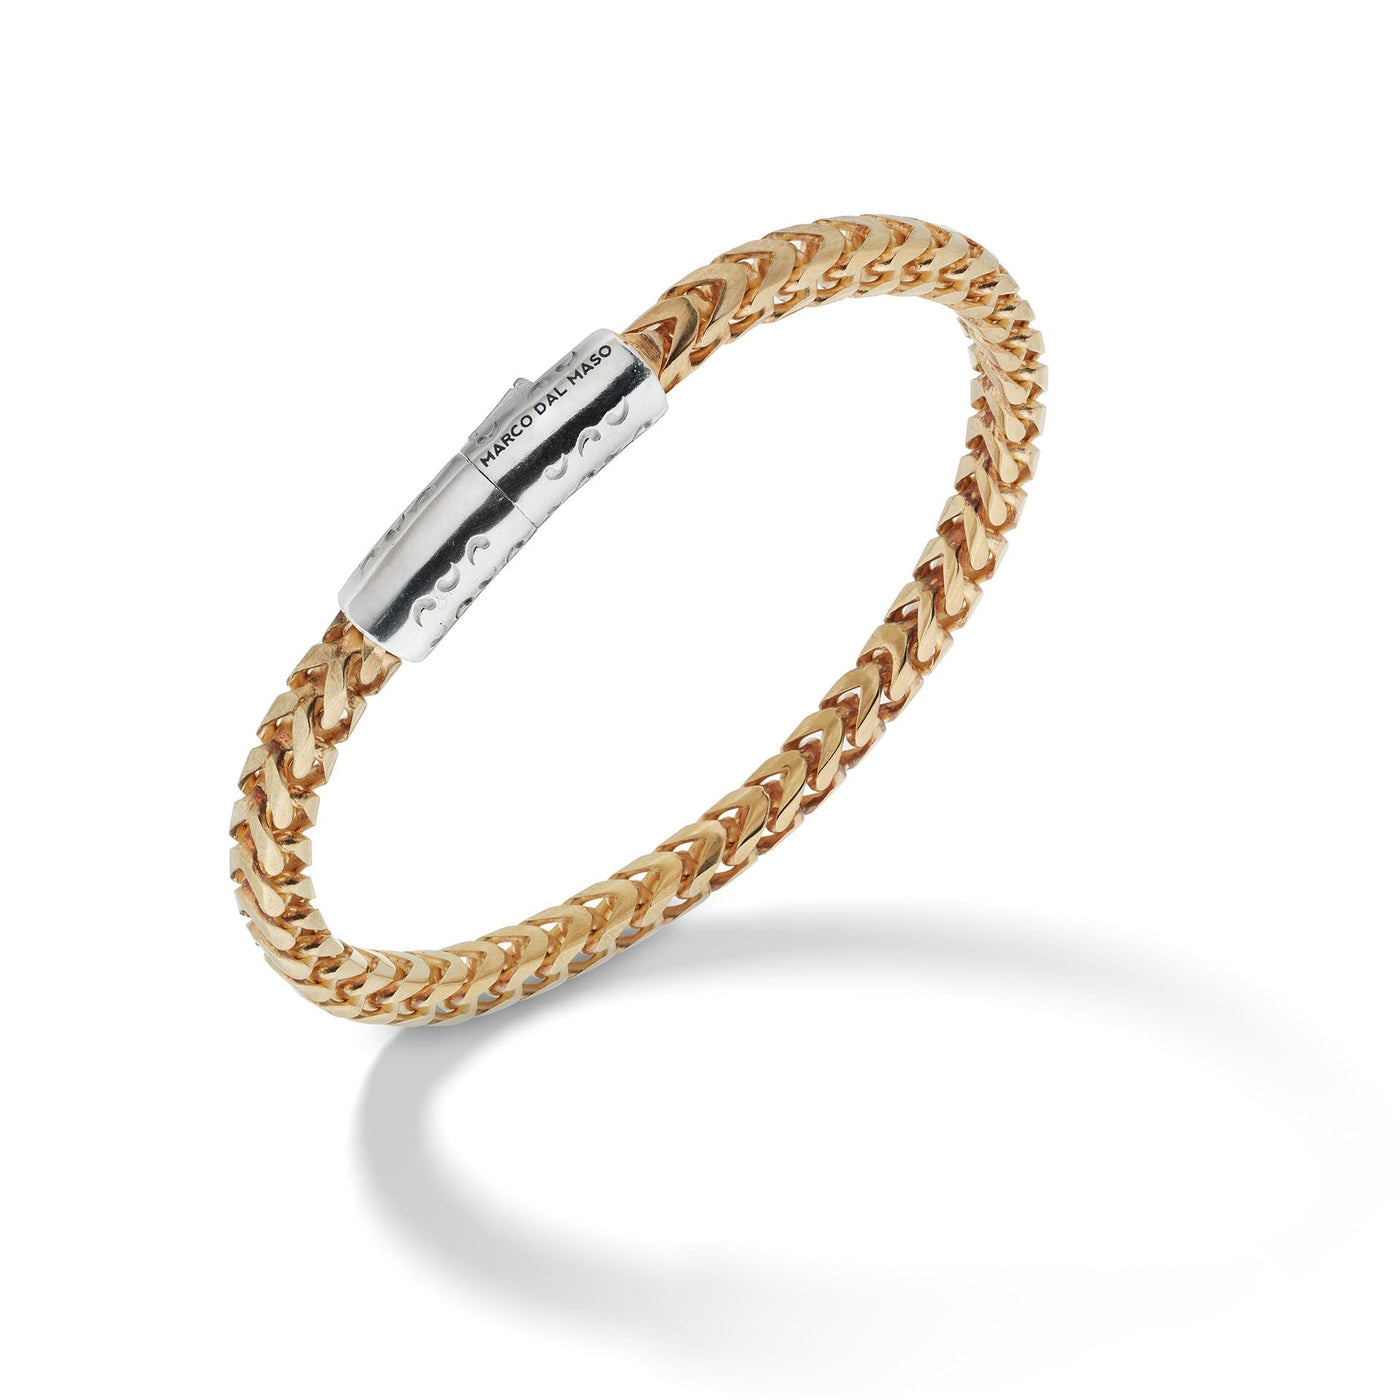 Ulysses Single Wrap 10mm Chain Bracelet with 18kt Yellow Gold Vermeil and Sterling Silver